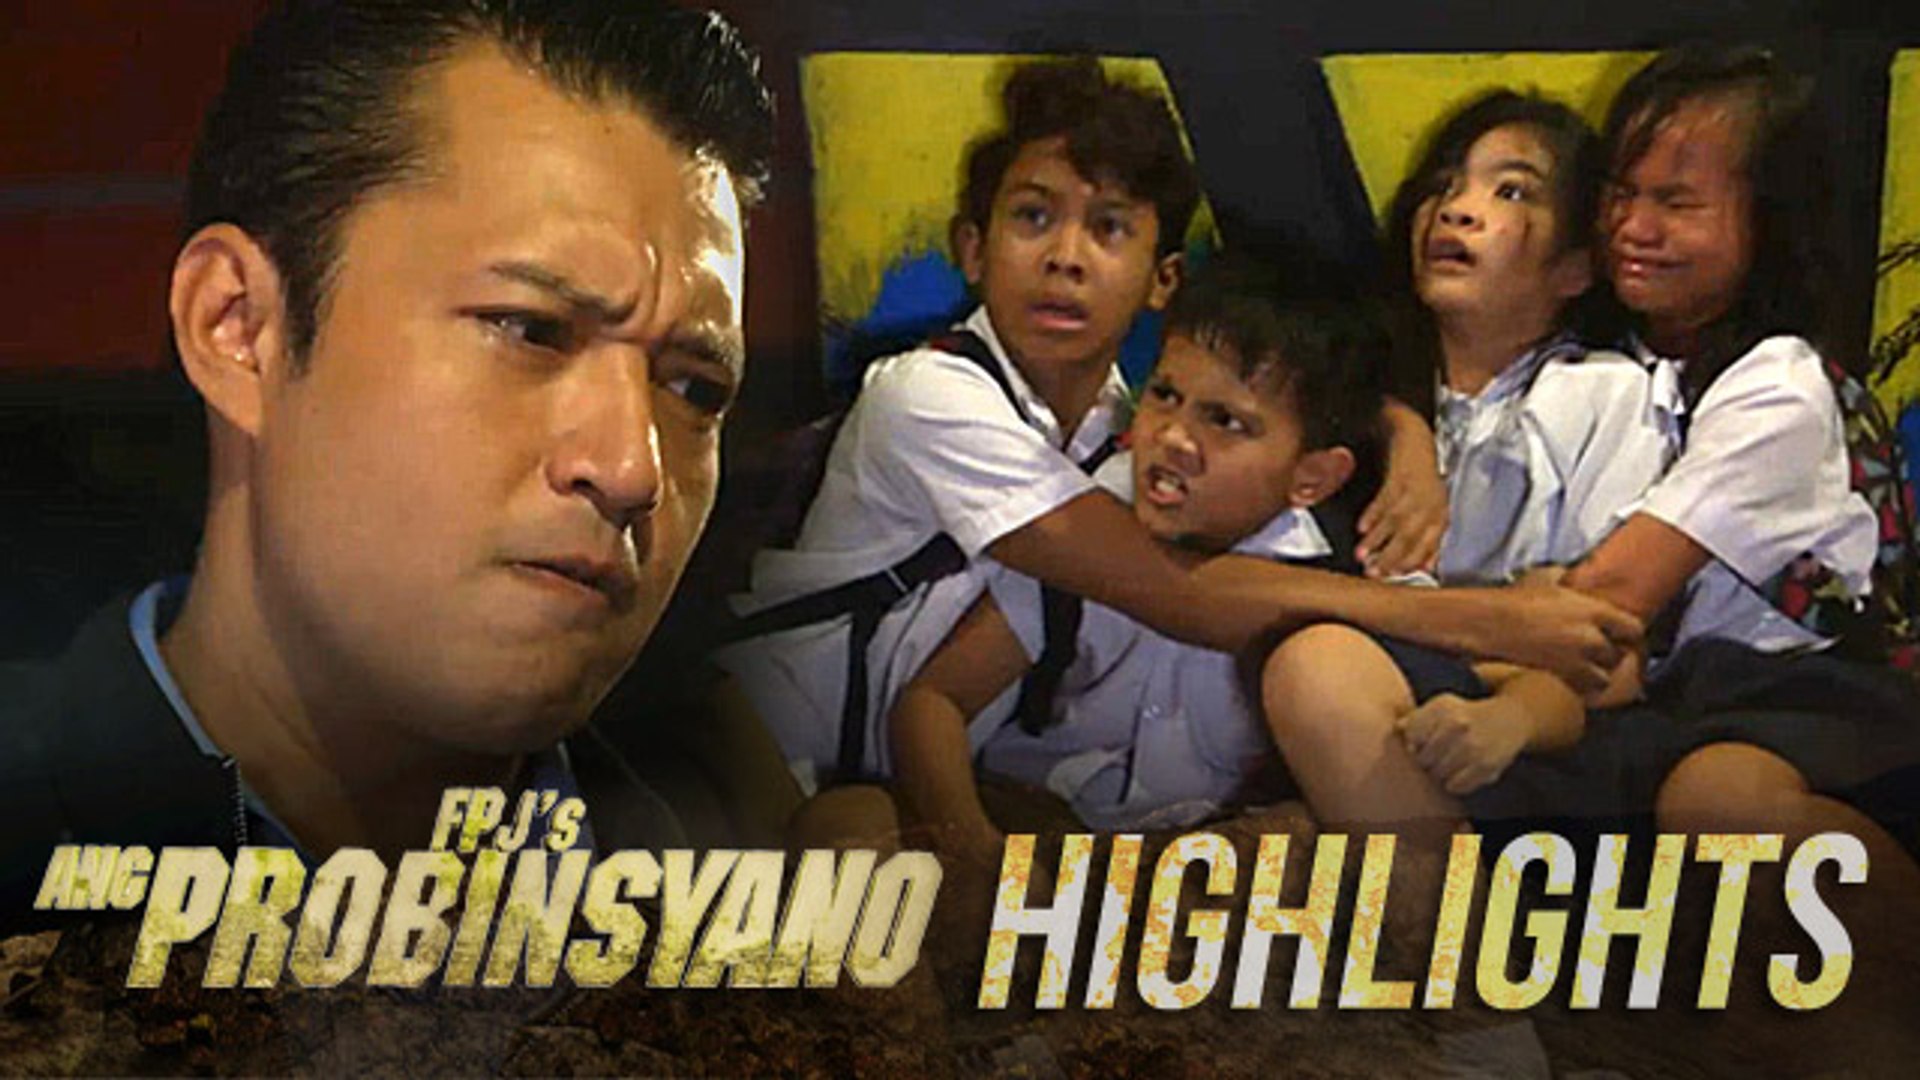 Brandon uses the children to know the location of Vendetta | FPJ's Ang Probinsyano